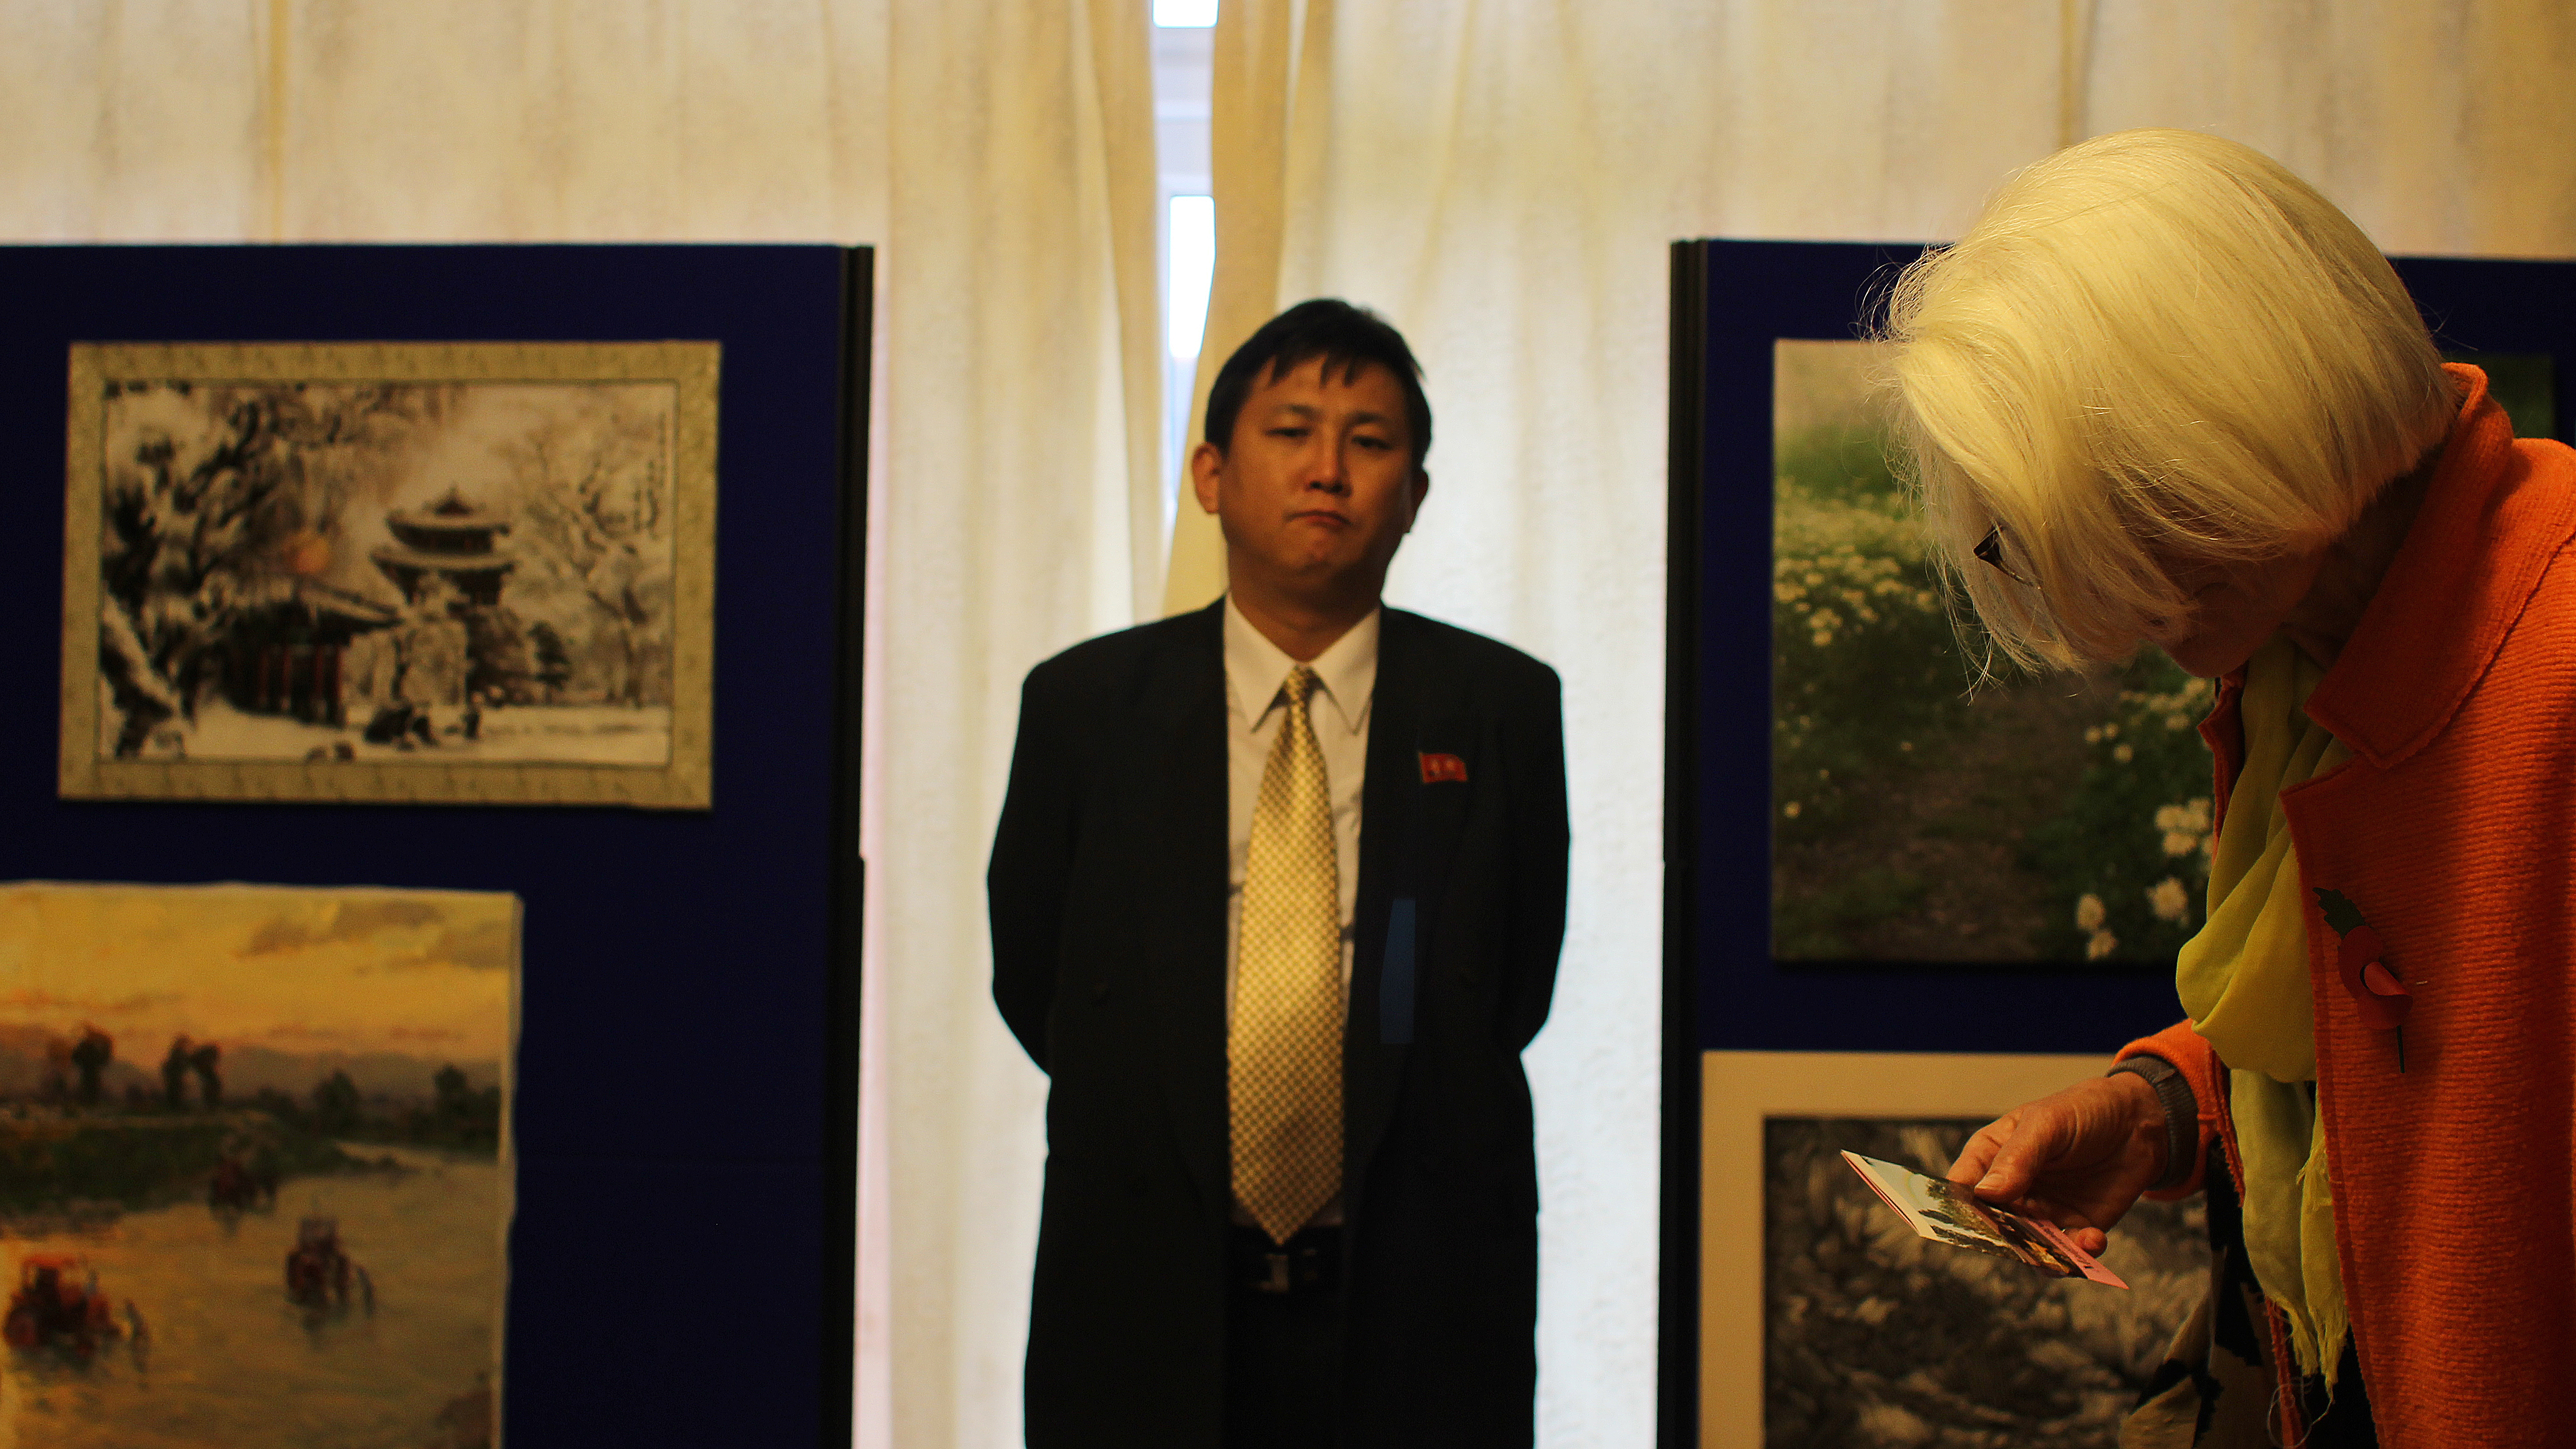 A North Korean official in London watches over visitors to the embassy's art exhibition